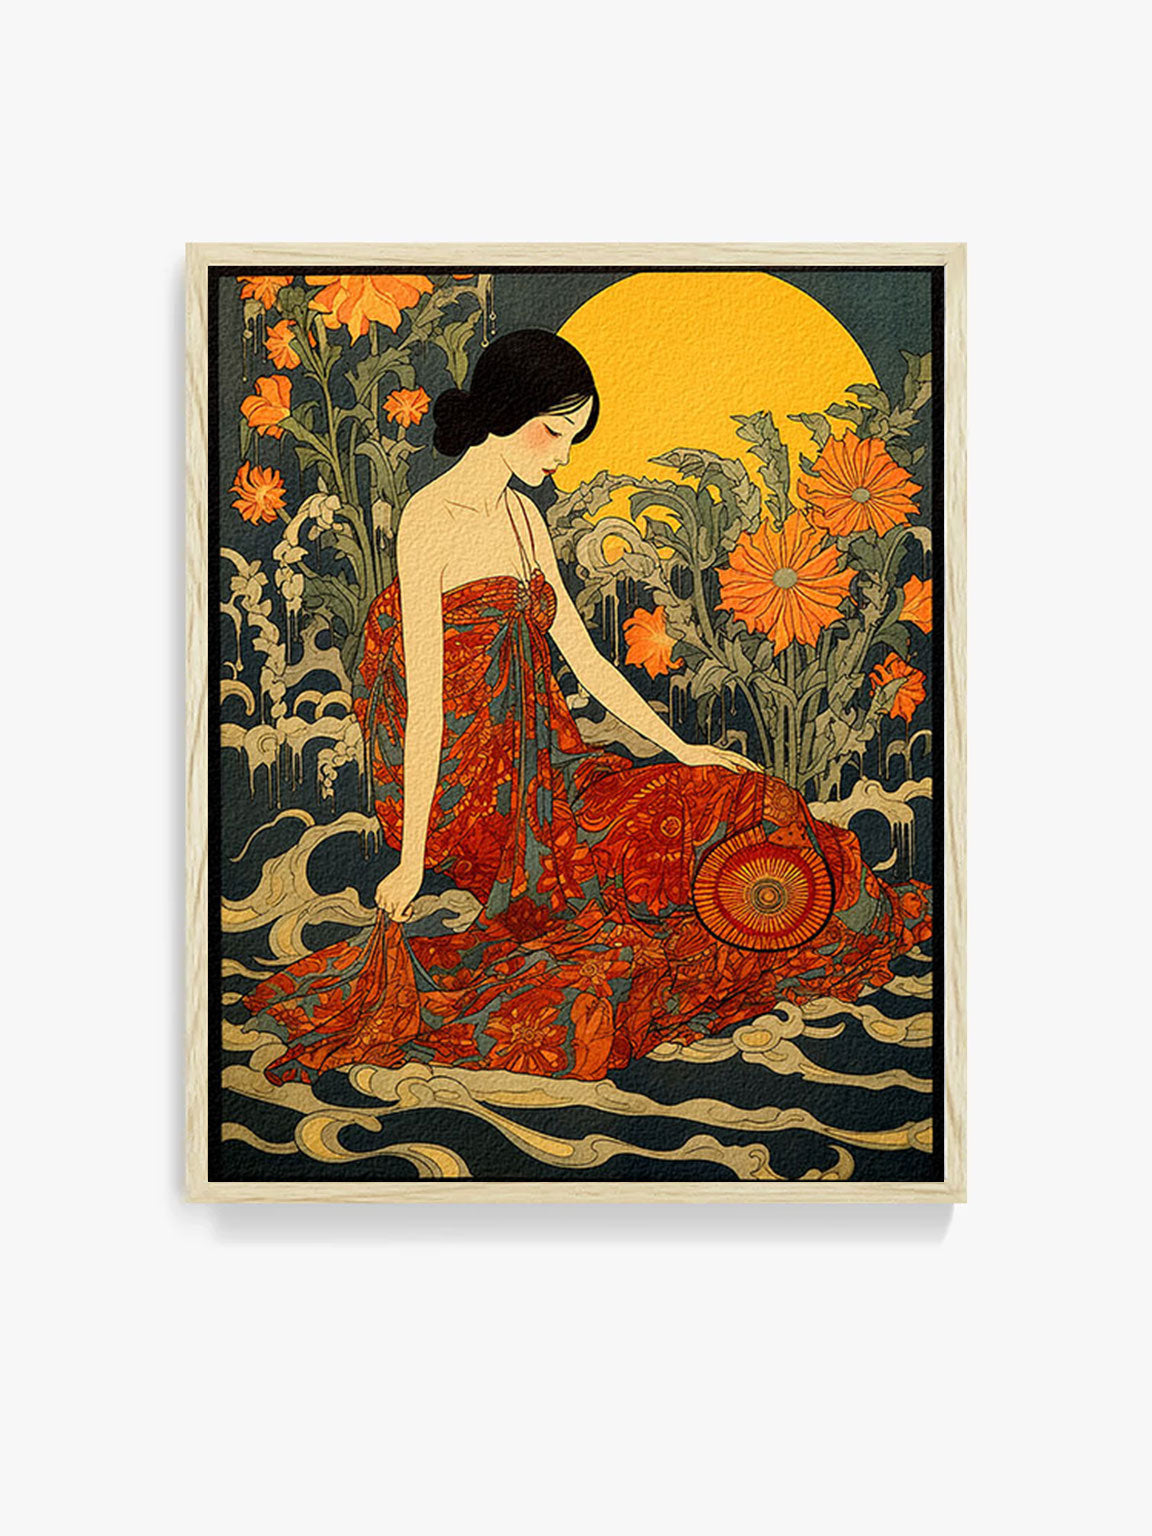 original art print, Vintage Retro Art Style Poster: Woman with Flowers in Orange Tones - Inspired by Art Deco, Fashion, and Classic Movies, Retro Glam Fashion Portrait, Modern Art Deco Print, Eclectic Punk Boho Decor, Vintage Flowers Wall Art, Interior Design, Moody Graphic Art, Retro Glam Fashion Portrait, Modern Art Deco Print, Eclectic Punk Boho Decor, Vintage Flowers Wall Art, Interior Design, Moody Graphic Art, Bathroom Art, Living Room Wall Decor, Art for your Walls